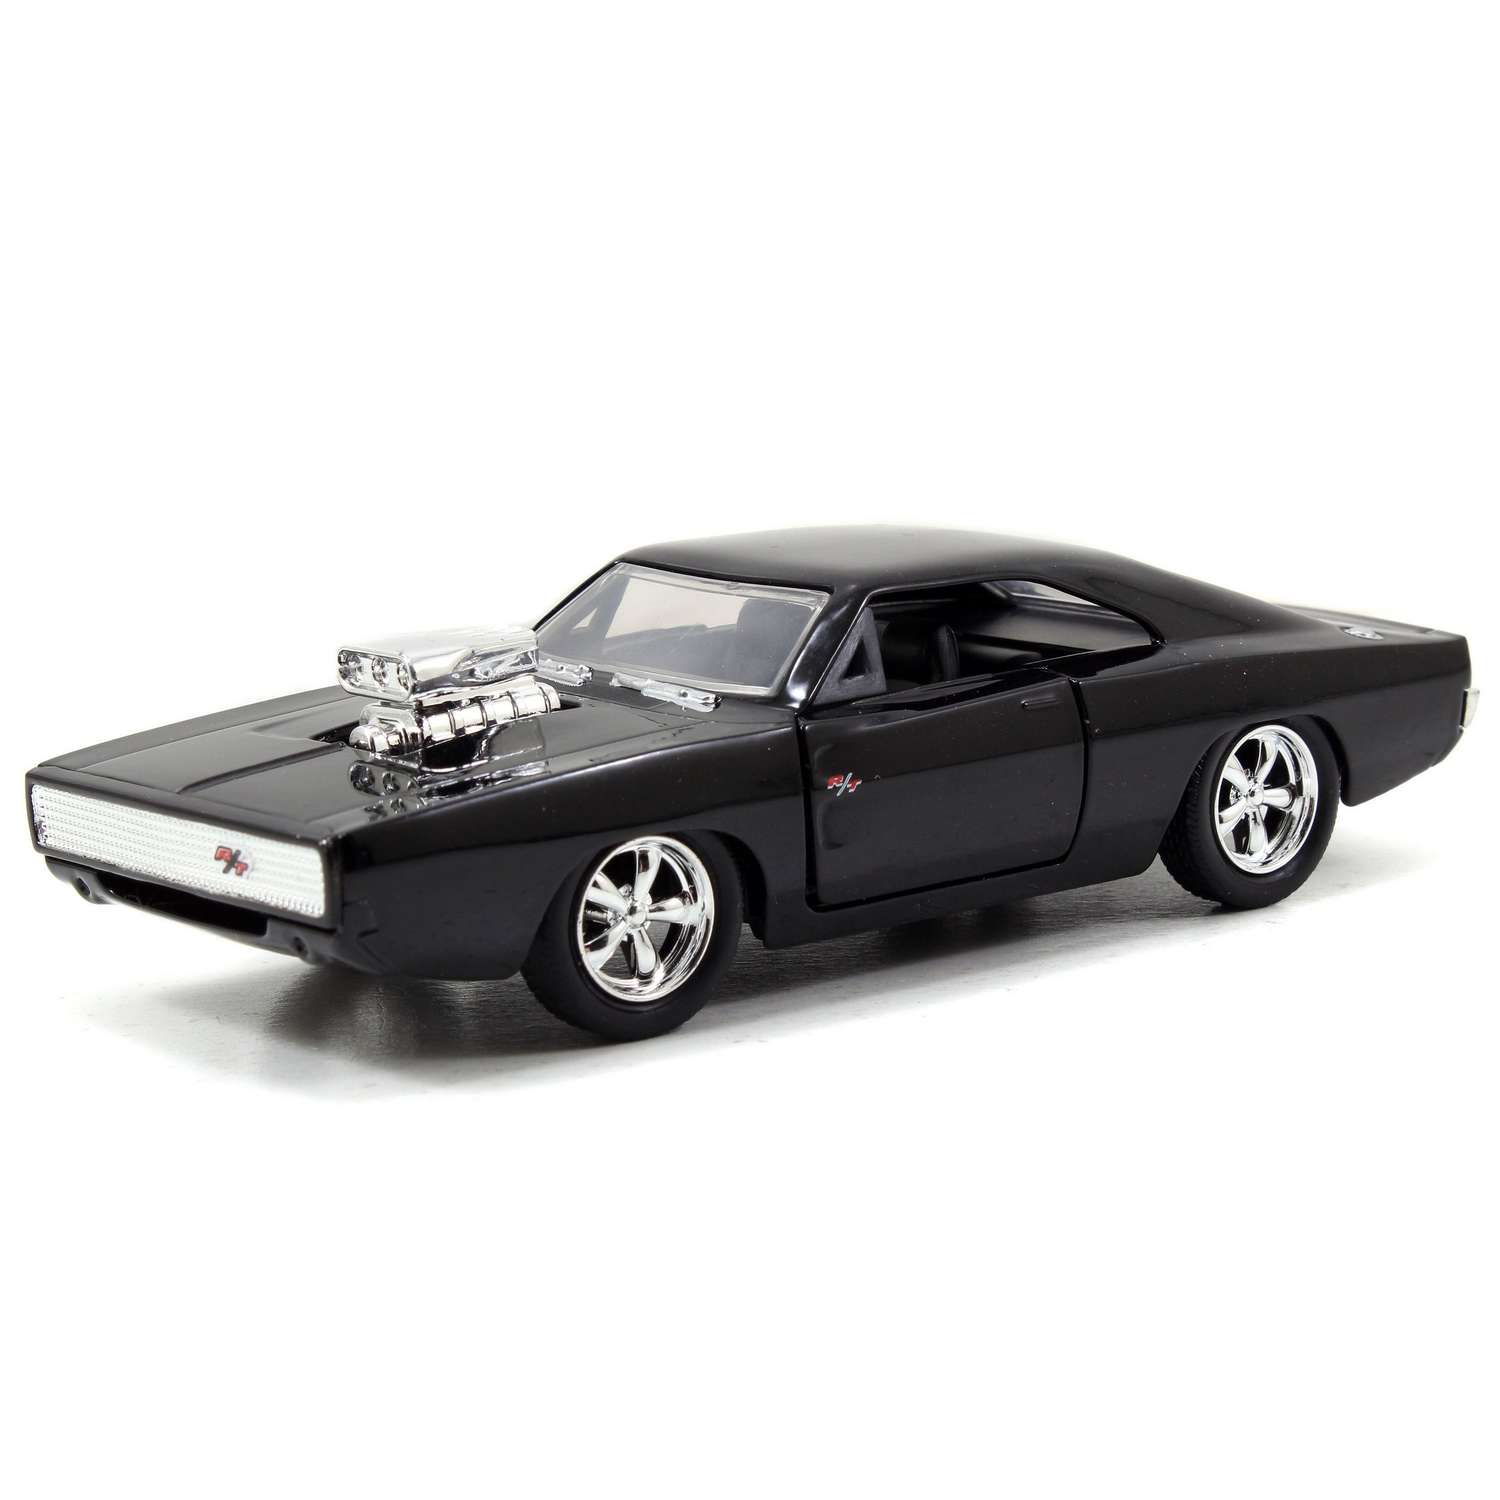 Машинка Fast and Furious Die-cast 1970 Dodge Charger (Street) 1:32 металл 24037 - фото 1